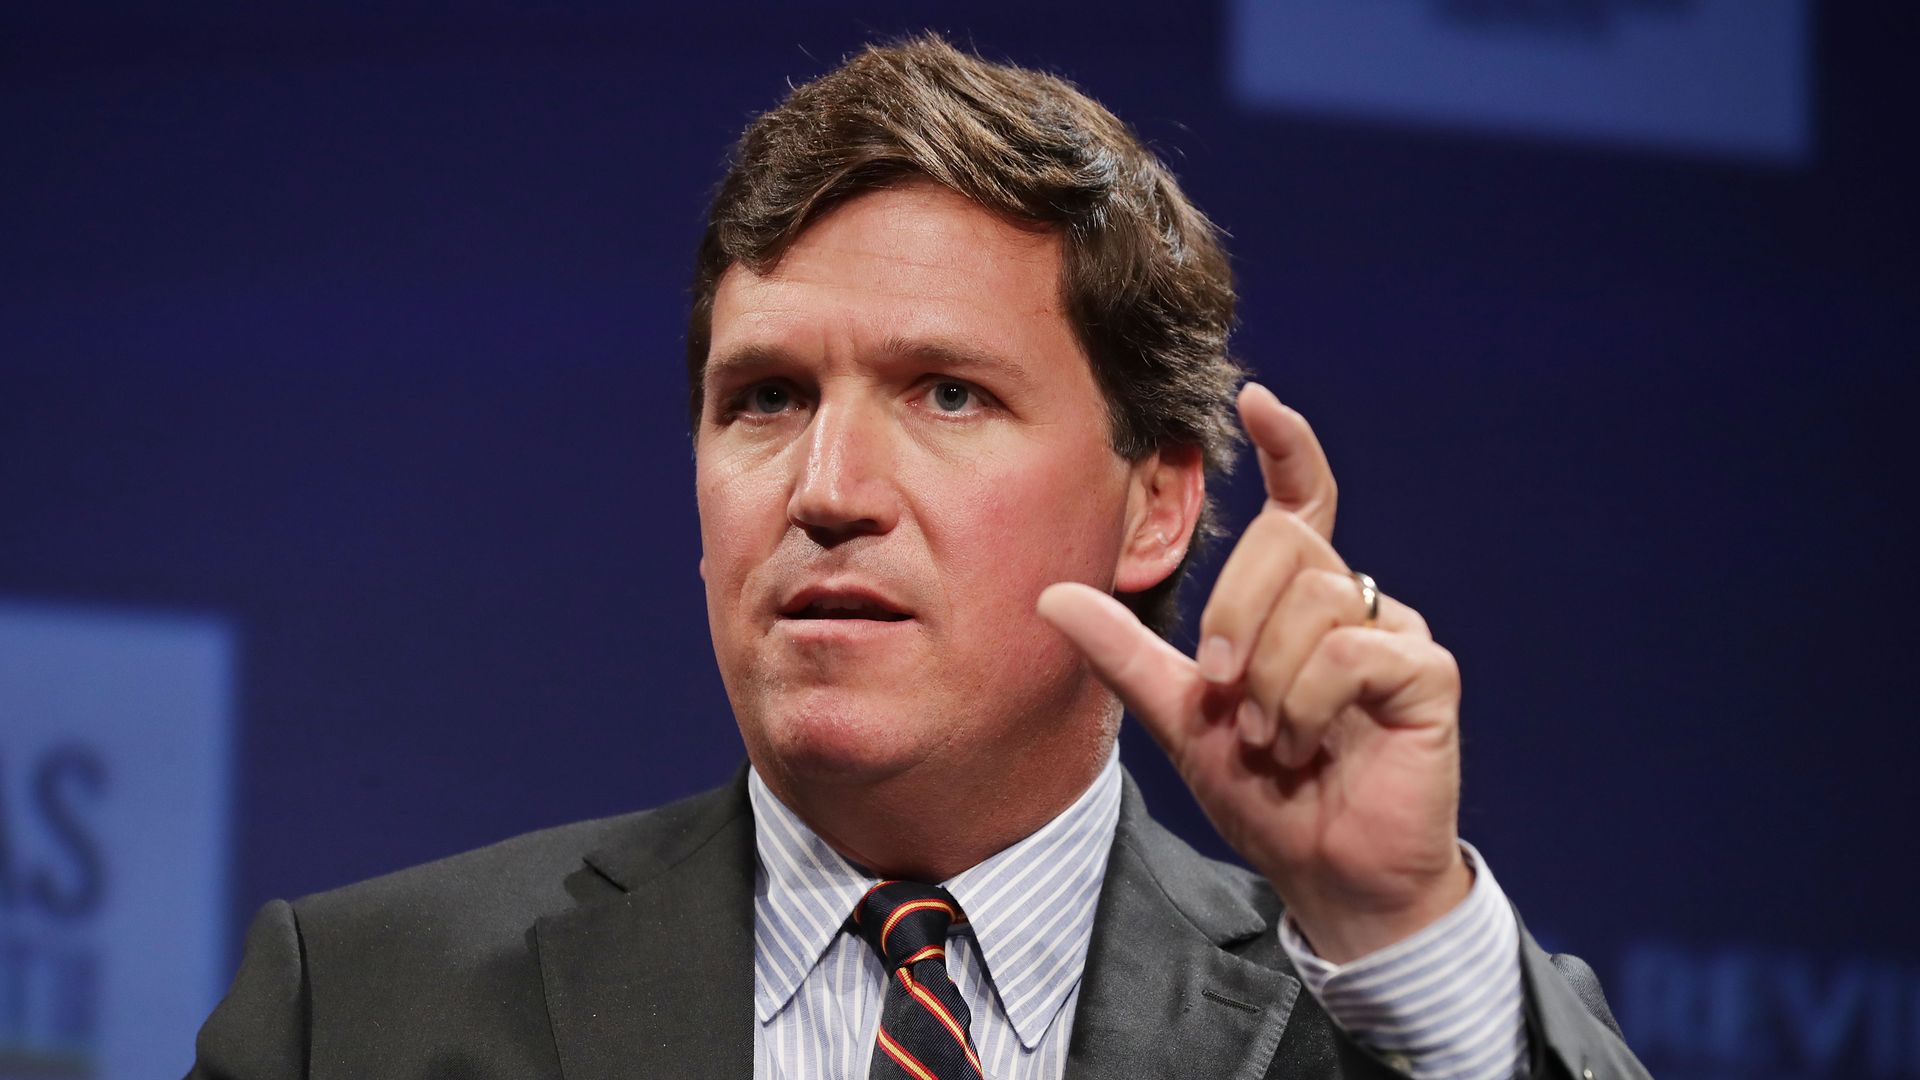 Fox News host Tucker Carlson discusses 'Populism and the Right' during the National Review Institute's Ideas Summit at the Mandarin Oriental Hotel March 29, 2019 in Washington, DC